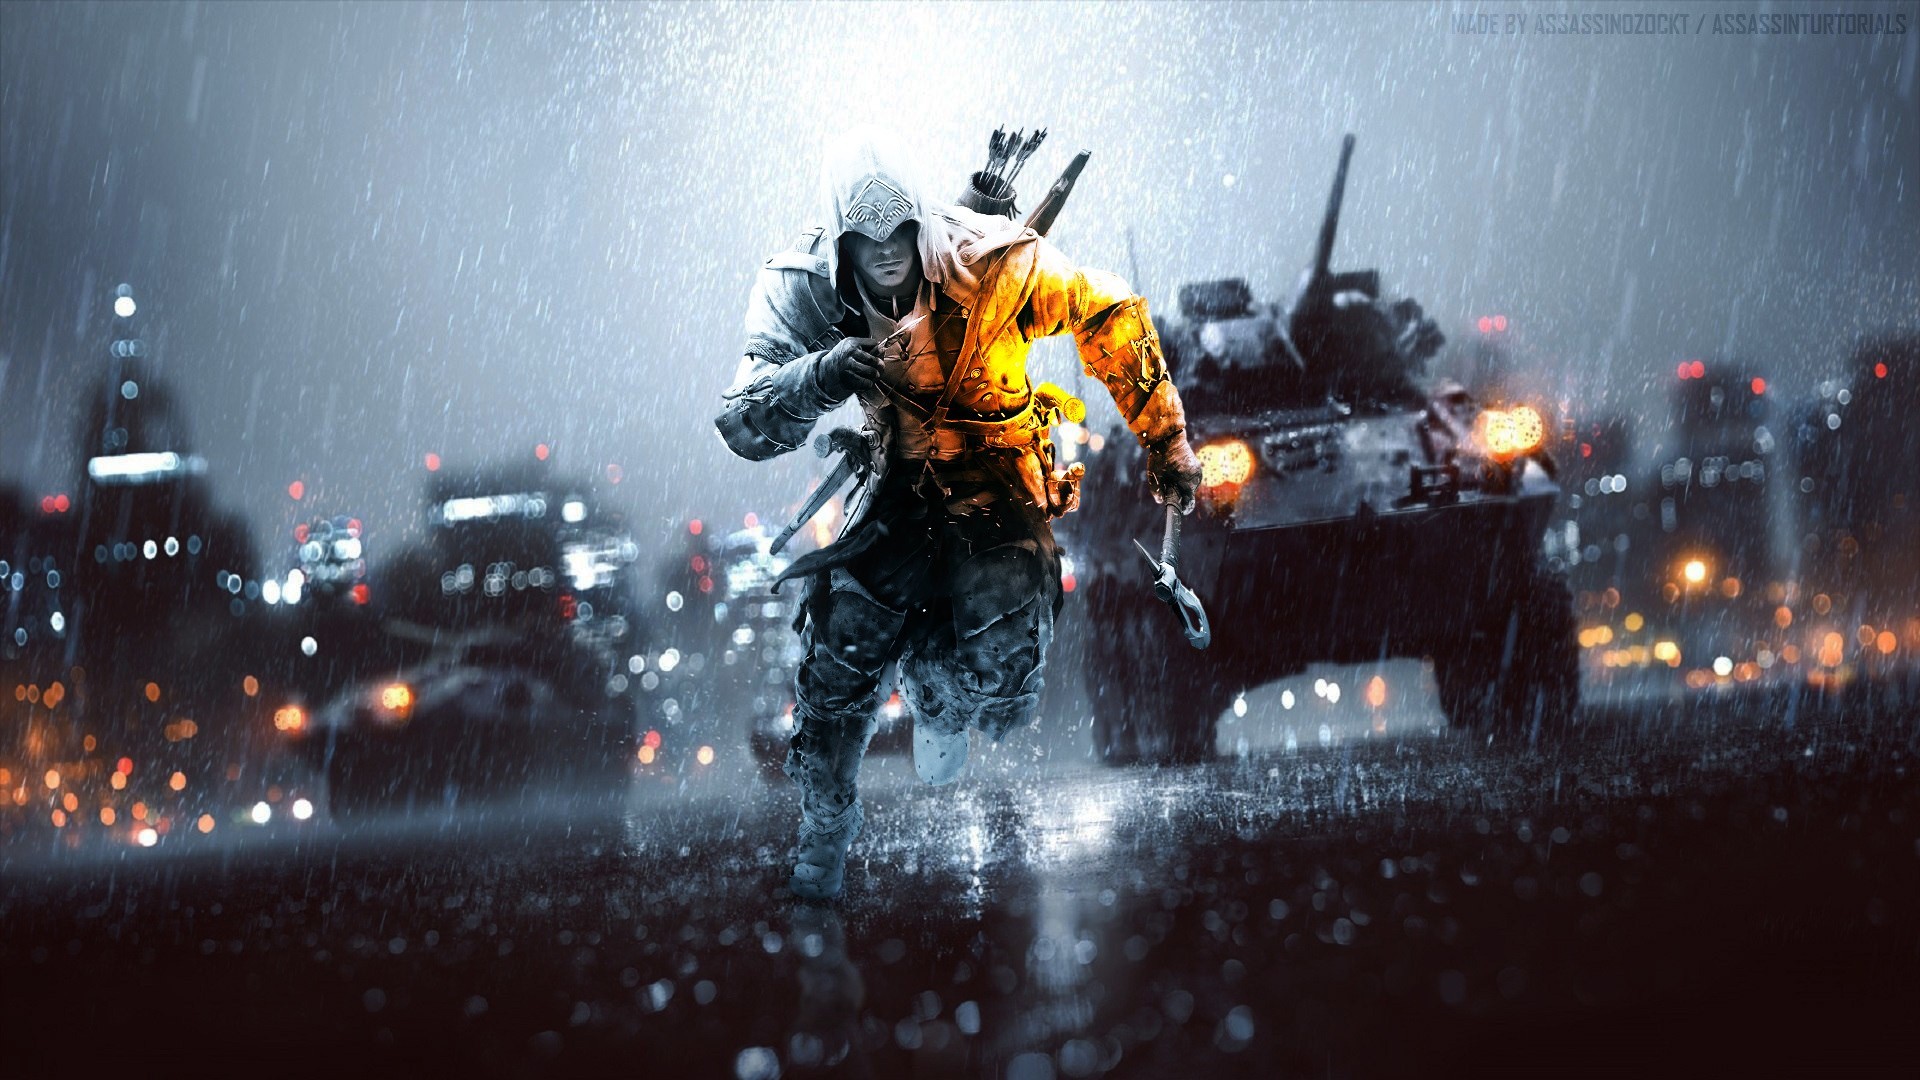 General 1920x1080 video games video game art PC gaming crossover Battlefield 4 Assassin's Creed